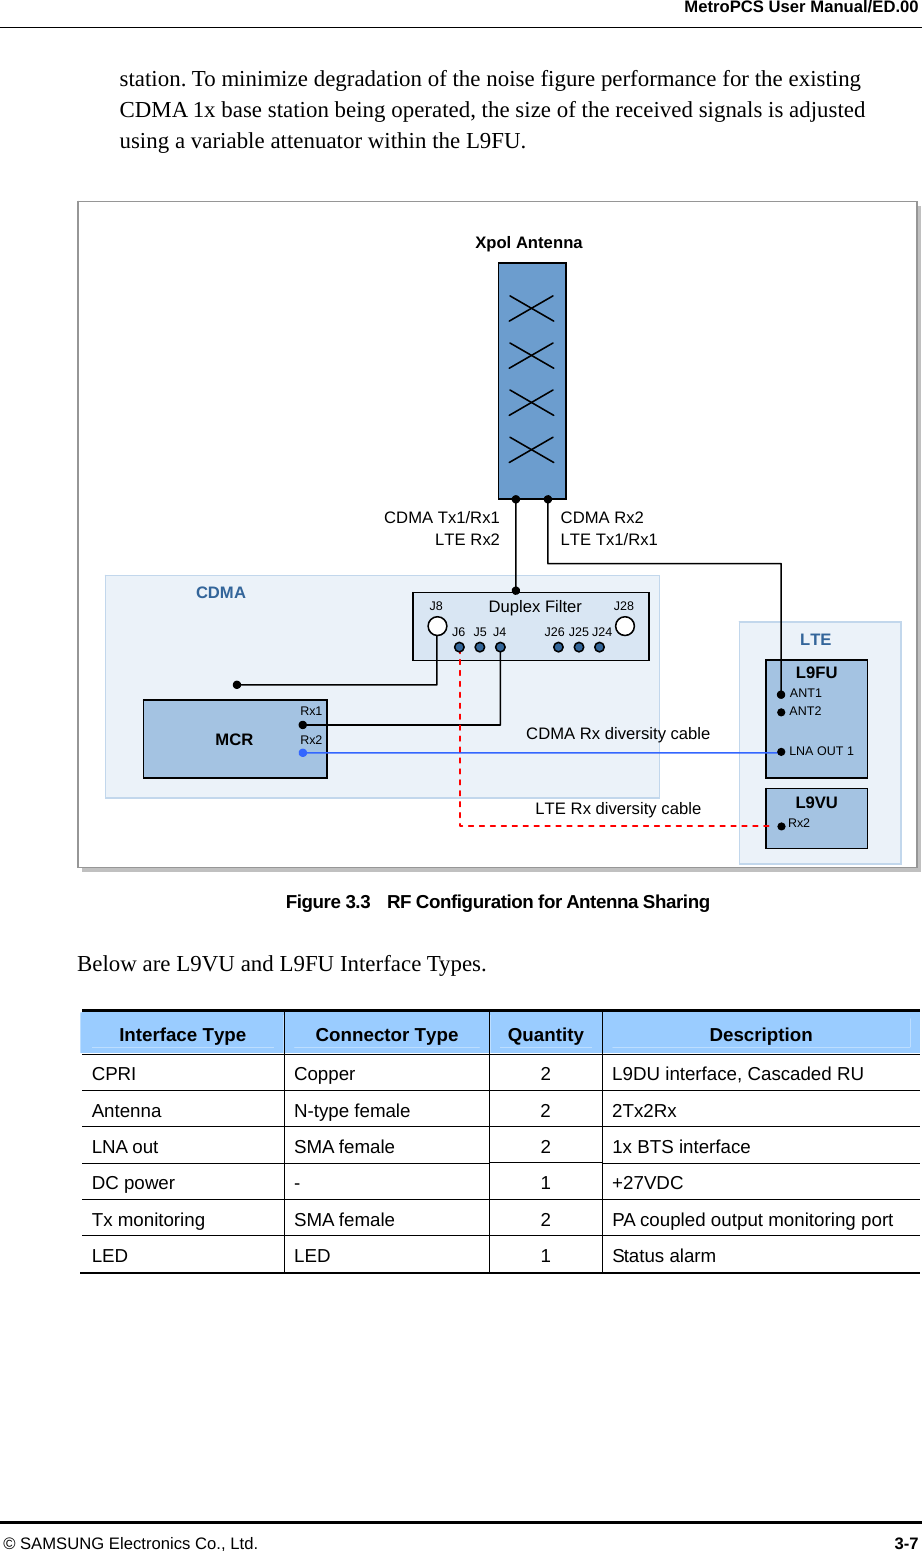  MetroPCS User Manual/ED.00 © SAMSUNG Electronics Co., Ltd.  3-7 station. To minimize degradation of the noise figure performance for the existing CDMA 1x base station being operated, the size of the received signals is adjusted using a variable attenuator within the L9FU.  Figure 3.3    RF Configuration for Antenna Sharing  Below are L9VU and L9FU Interface Types.  Interface Type  Connector Type  Quantity Description CPRI  Copper  2  L9DU interface, Cascaded RU Antenna   N-type female  2  2Tx2Rx LNA out  SMA female  2  1x BTS interface DC power    -  1  +27VDC Tx monitoring  SMA female  2  PA coupled output monitoring port LED LED  1 Status alarm  CDMA LTE    MCR Xpol Antenna LTE Rx diversity cable CDMA Rx diversity cable CDMA Rx2 LTE Tx1/Rx1 CDMA Tx1/Rx1LTE Rx2Duplex Filter J8 J28 J6 J5 J4  J26 J25 J24 Rx1 Rx2 ANT1 ANT2 LNA OUT 1L9VU L9FU Rx2  